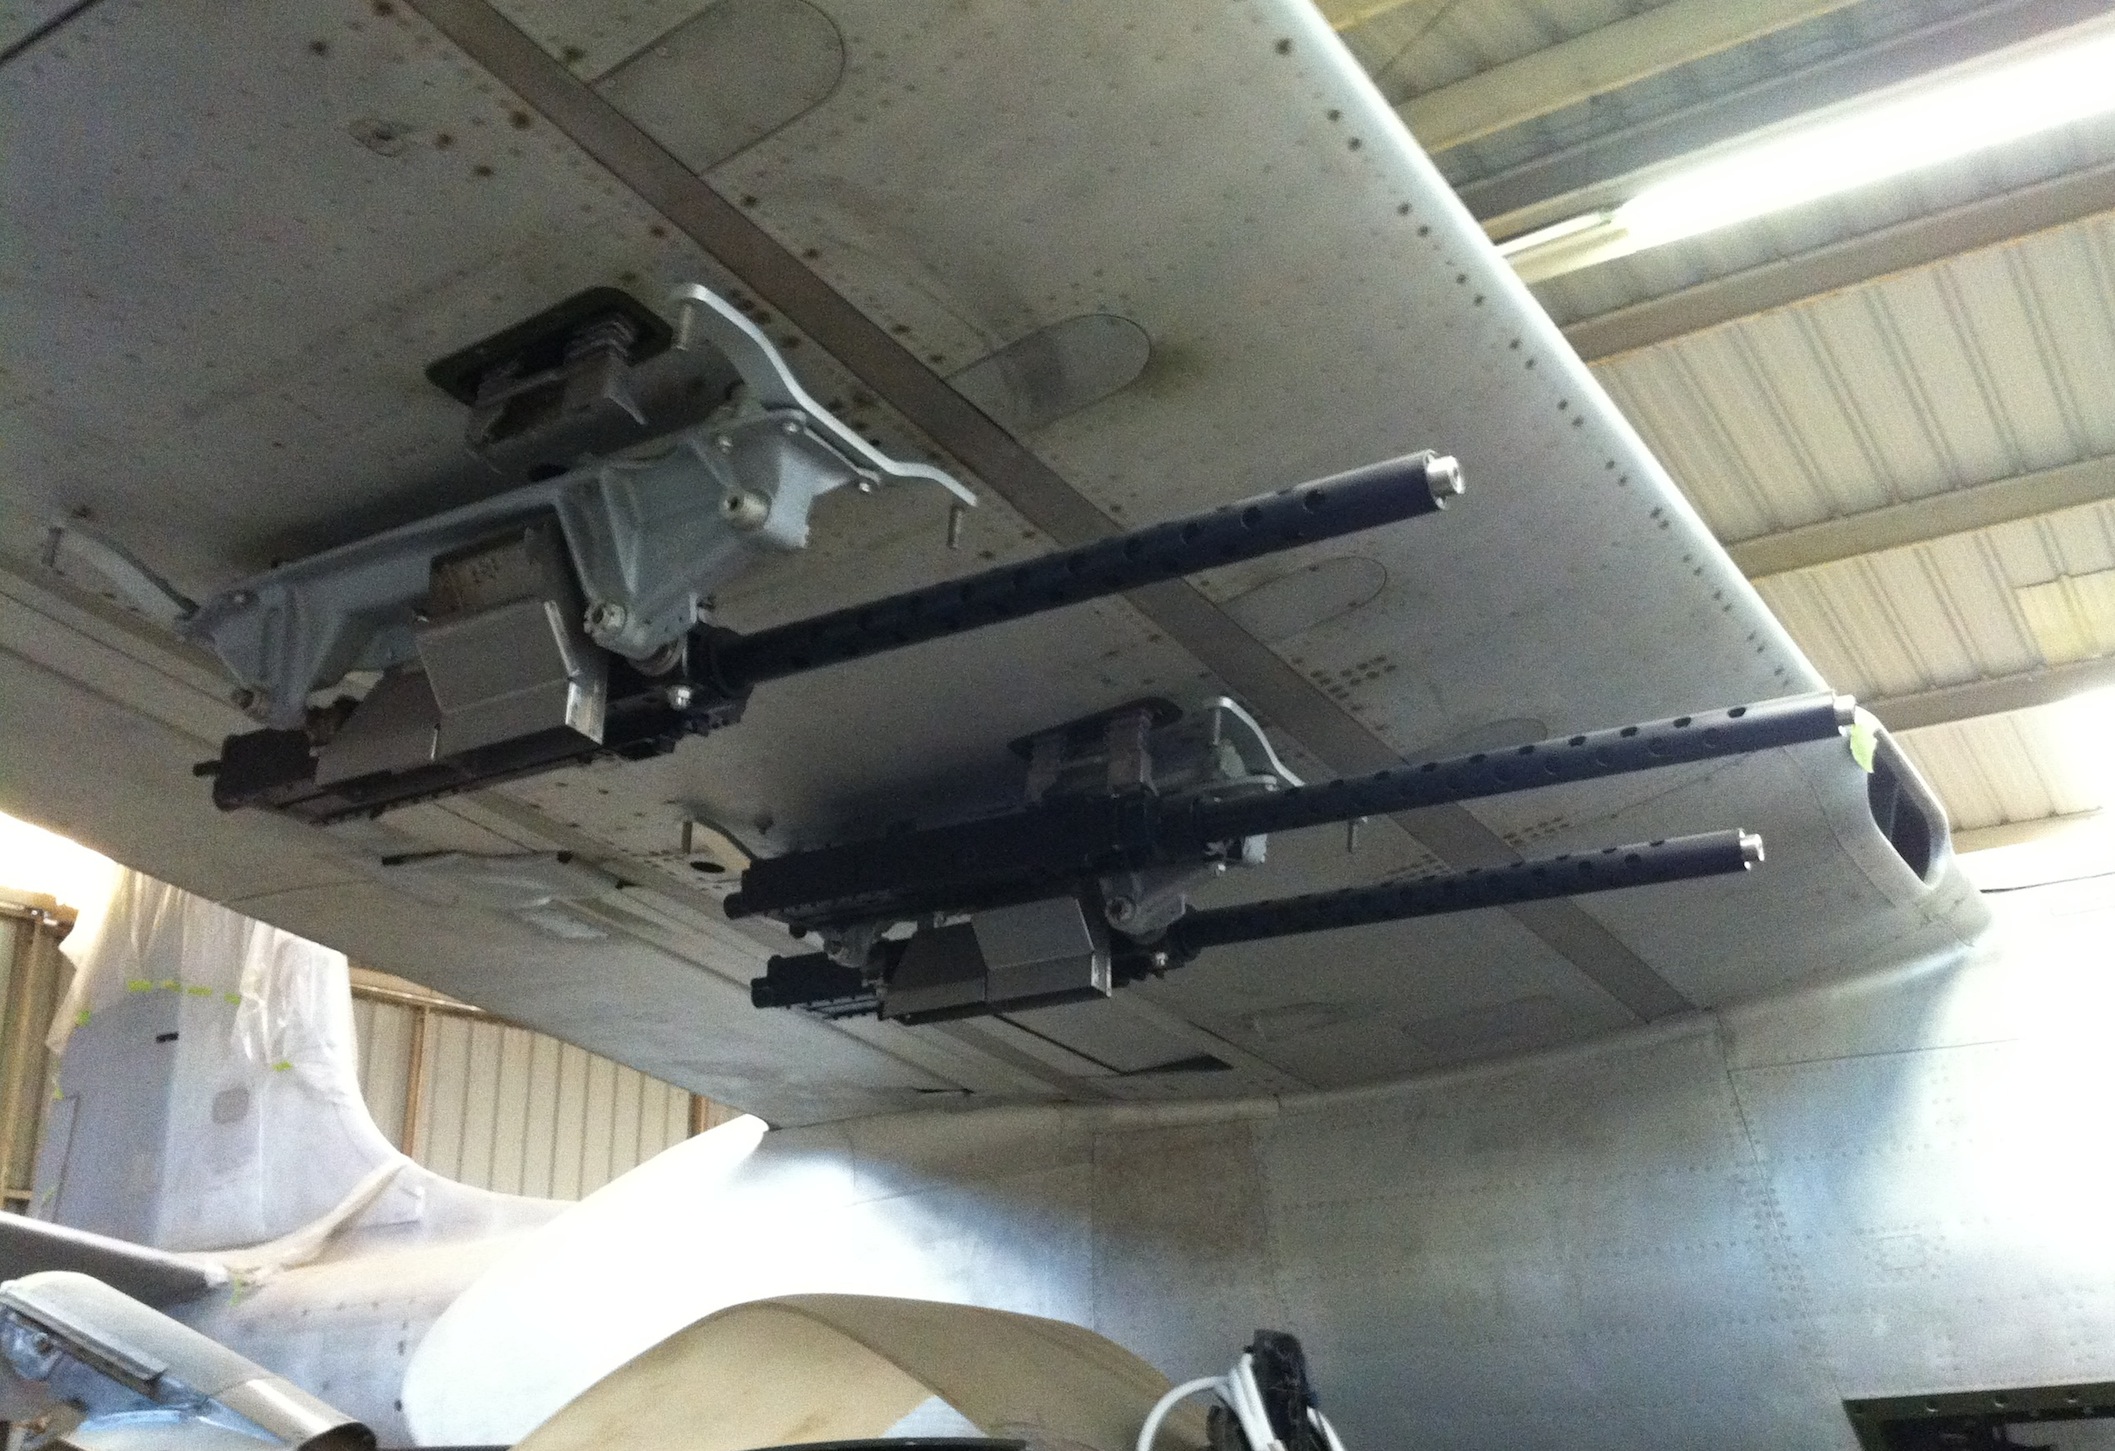 Three of the four guns mounted per side that are housed in streamlined pods